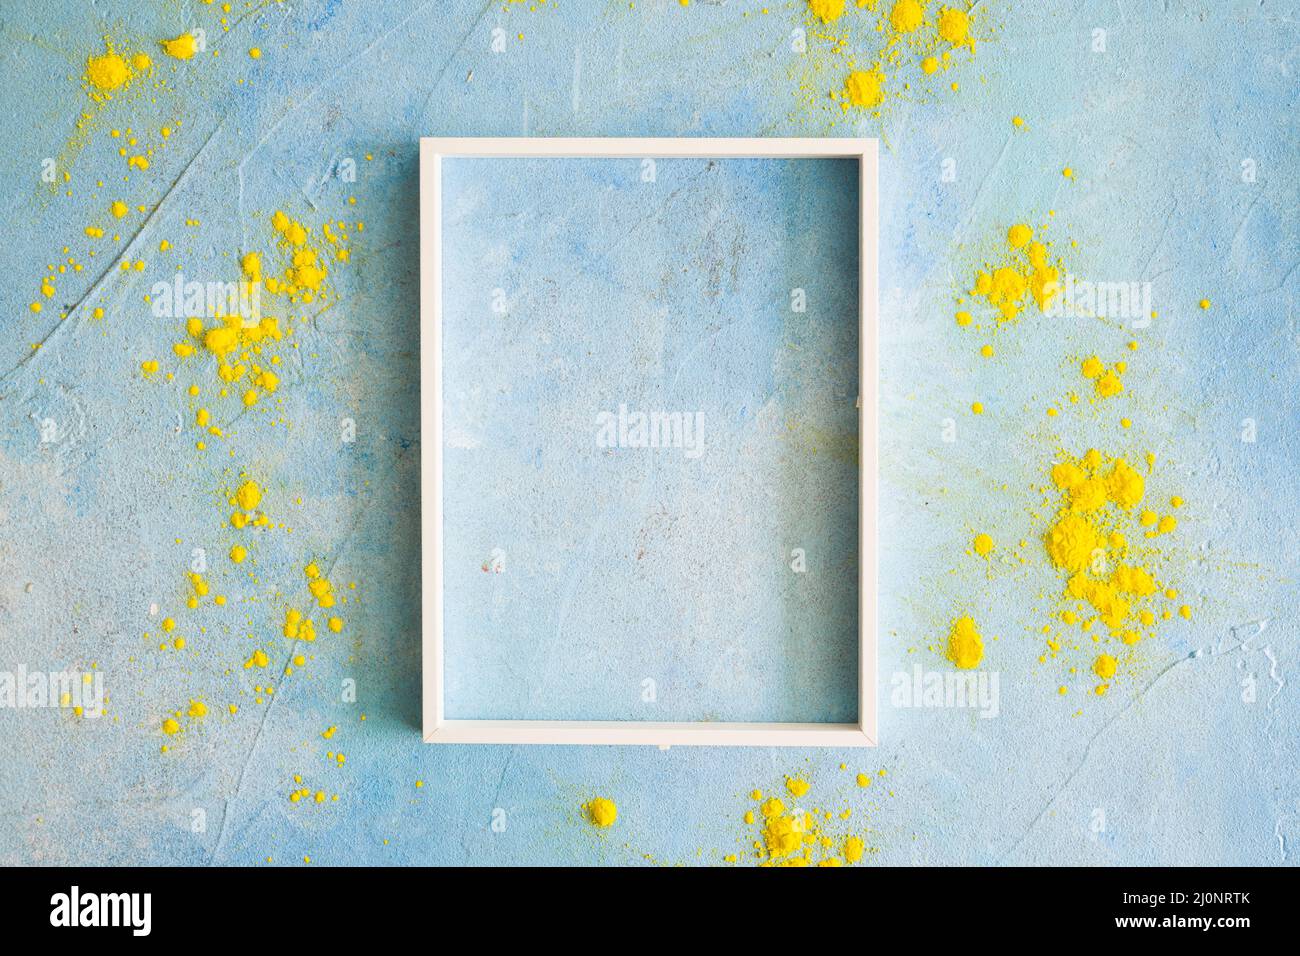 Yellow color powder around the white border frame on painted wall. High quality and resolution beautiful photo concept Stock Photo